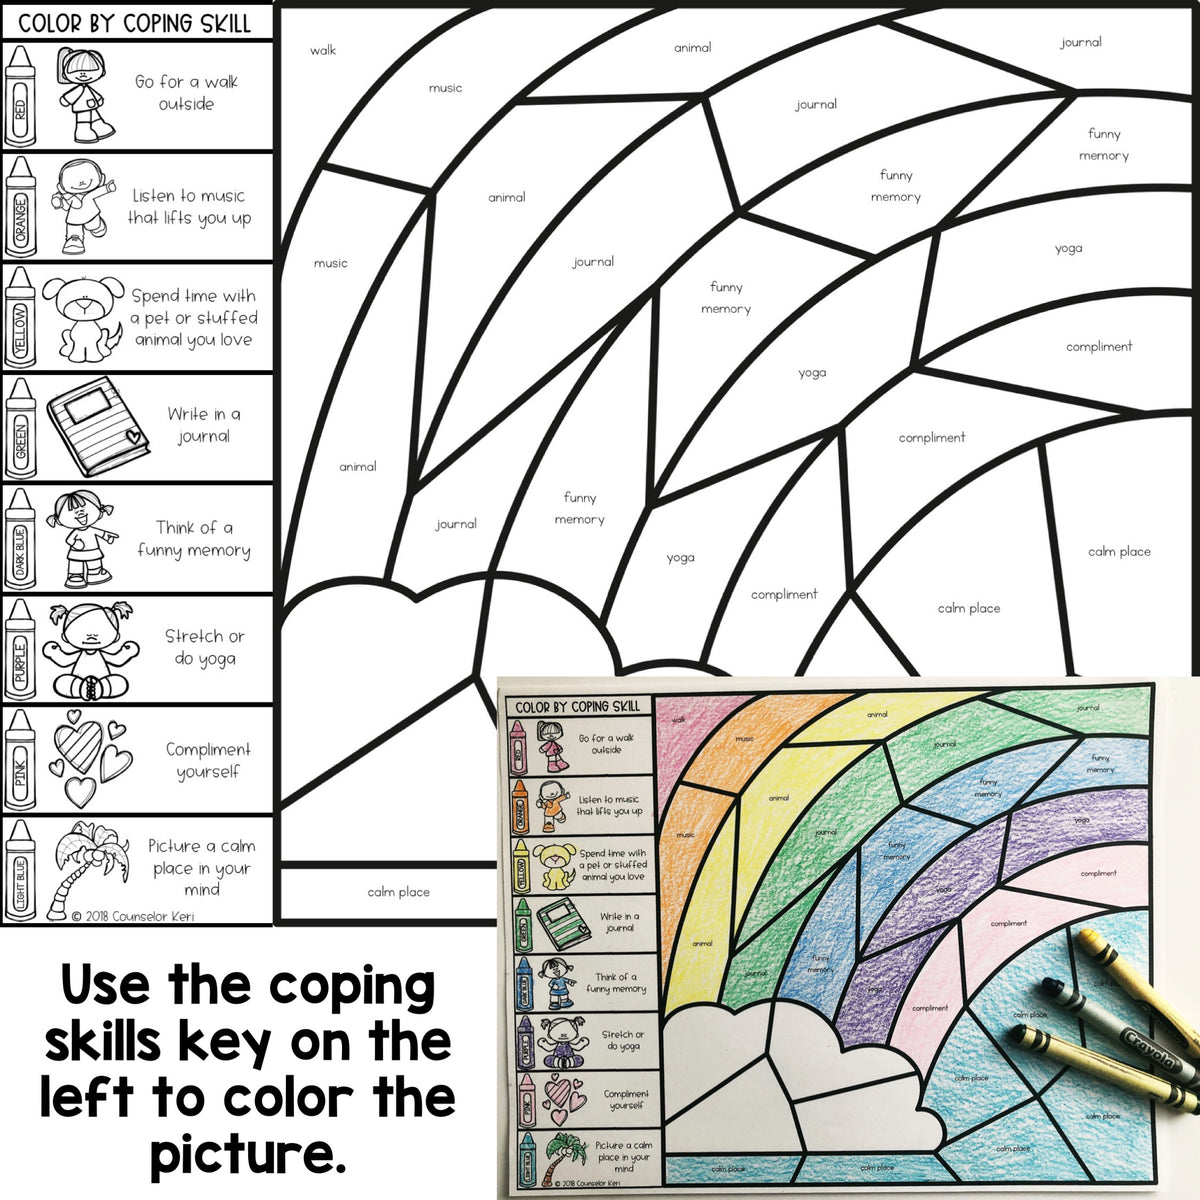 color-by-coping-skills-bundle-coping-skills-activities-counselor-keri